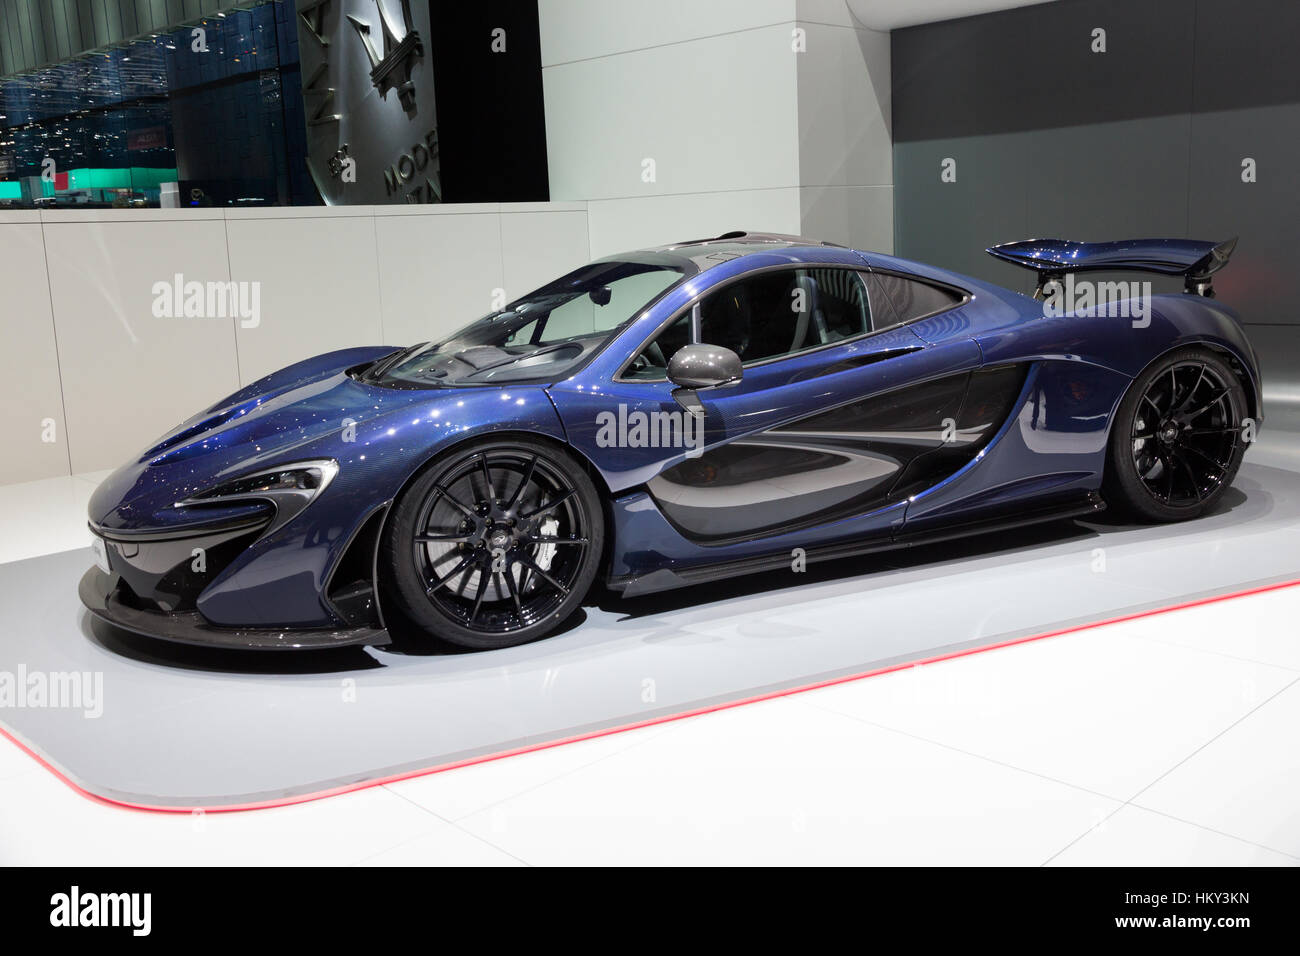 Mclaren P1 High Resolution Stock Photography and Images - Alamy